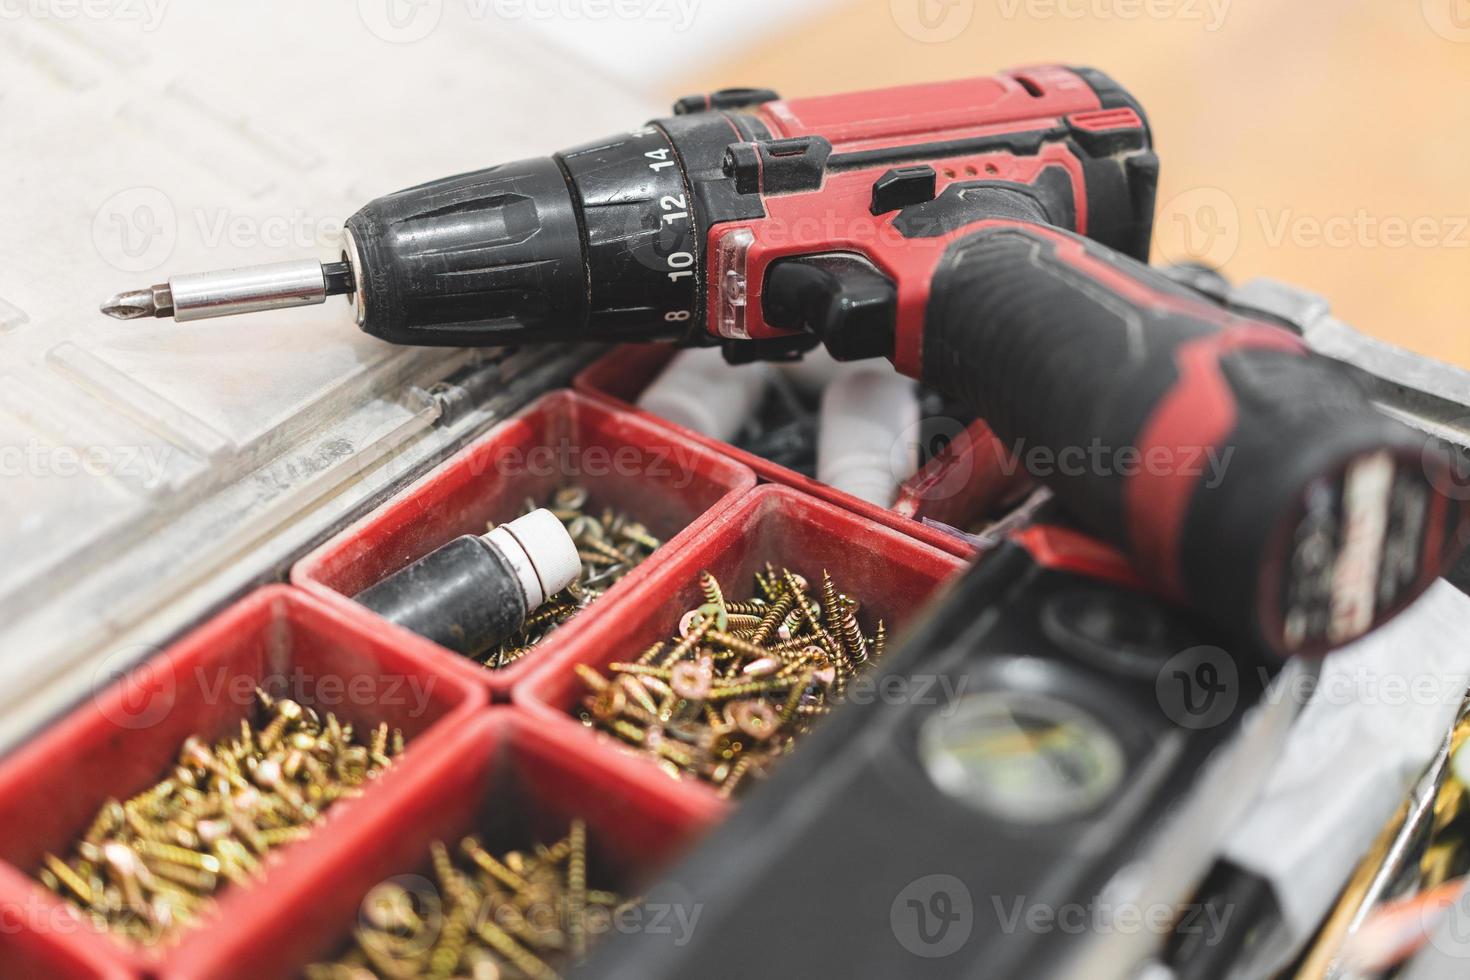 two electric screwdrivers or drills for screwing and drilling photo